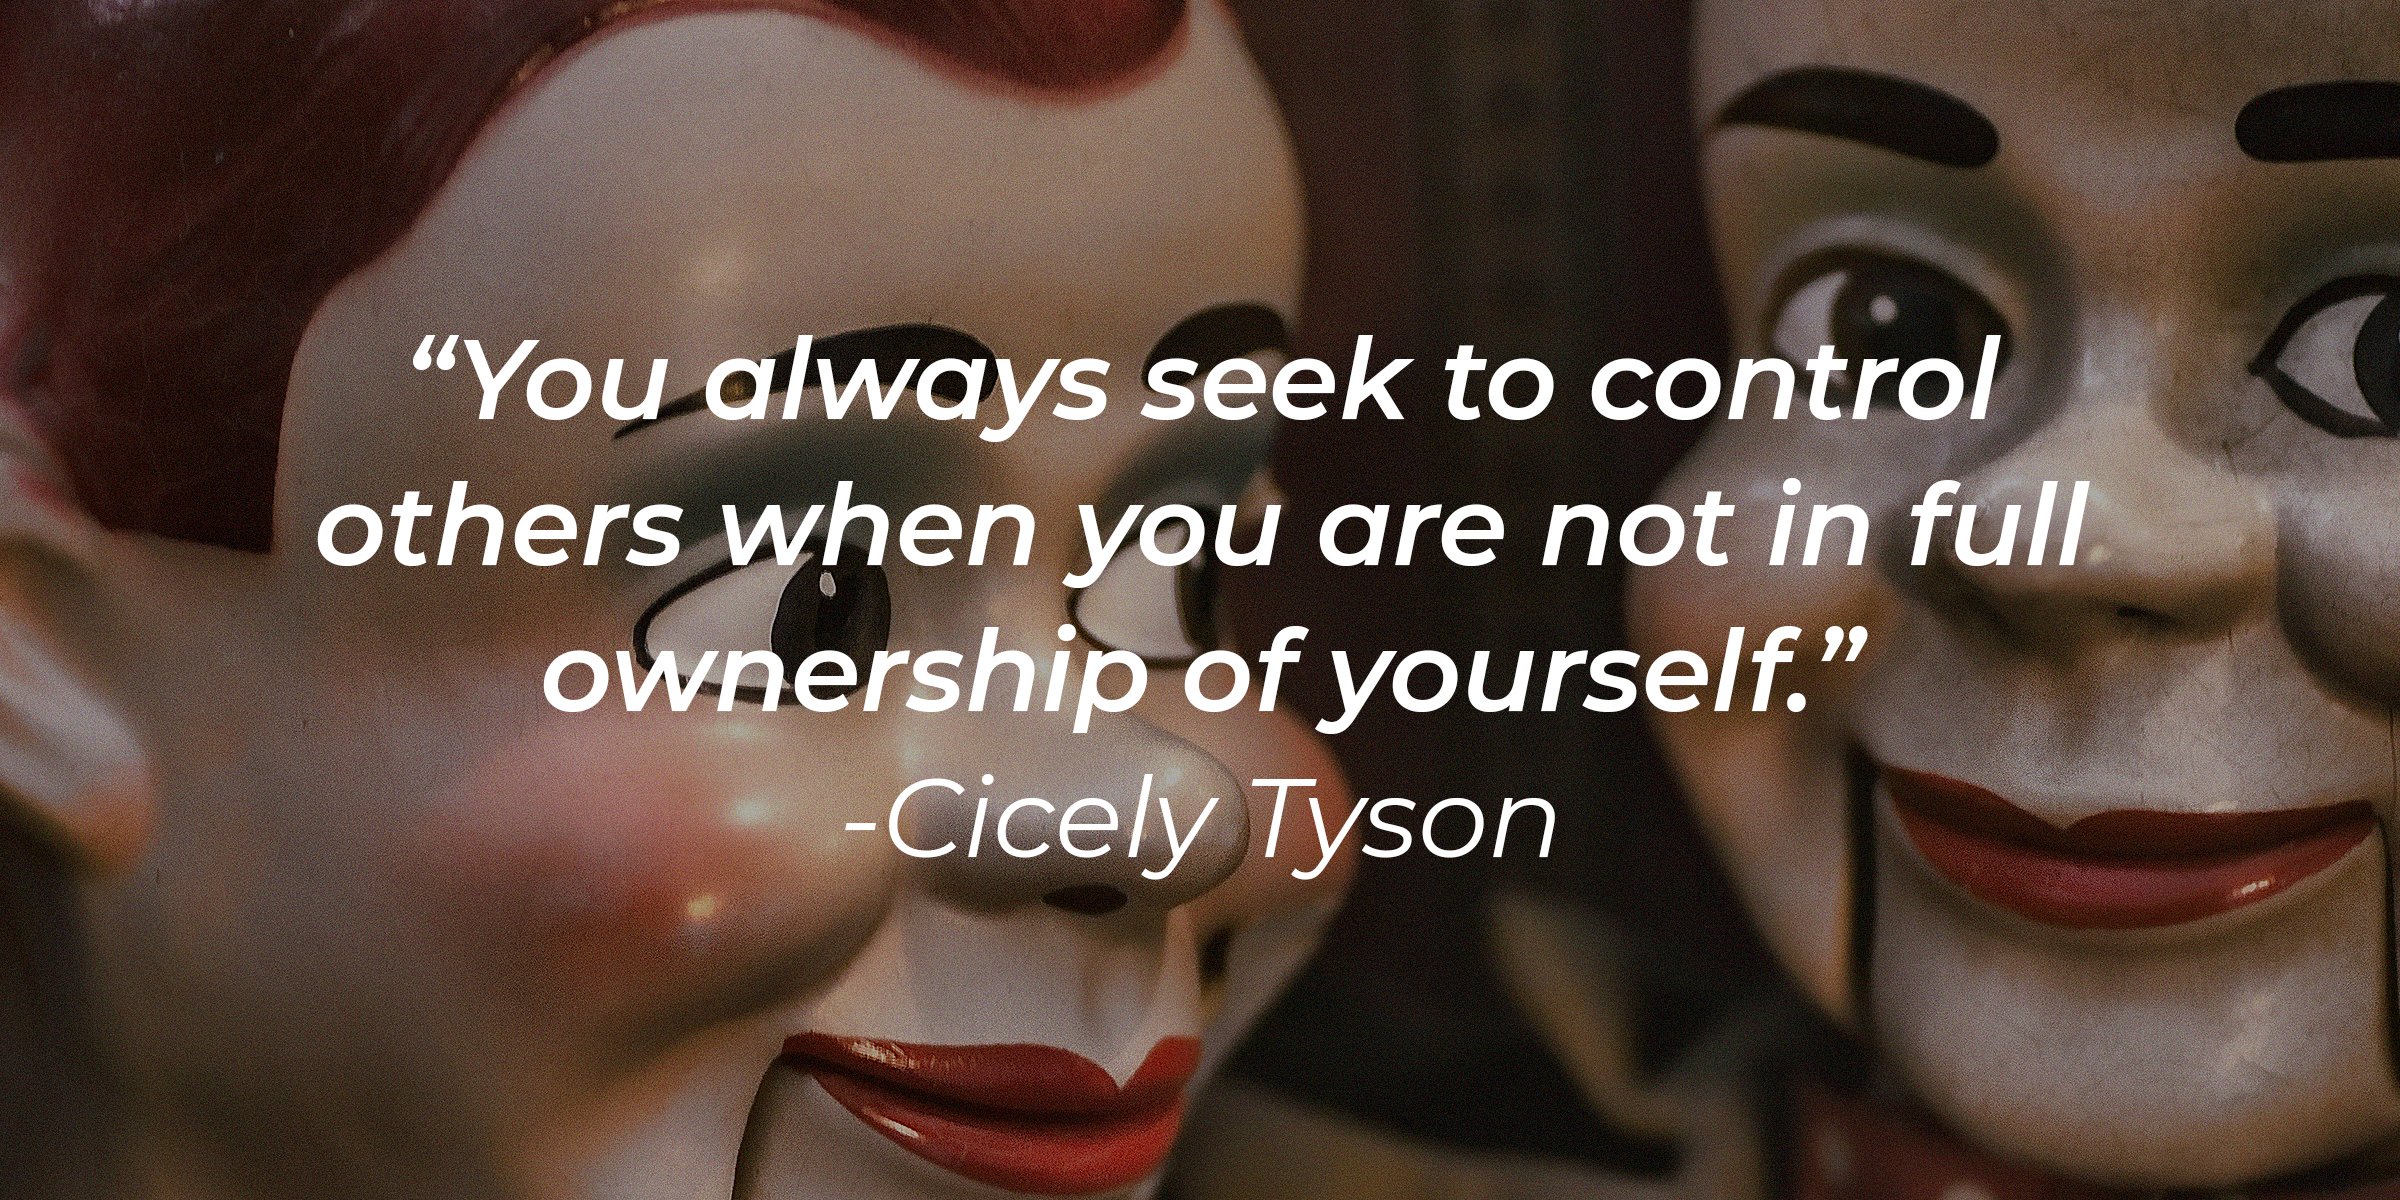 Unsplash | Puppets with the quote, "You always seek to control others when you are not in full ownership of yourself" by Cicely Tyson